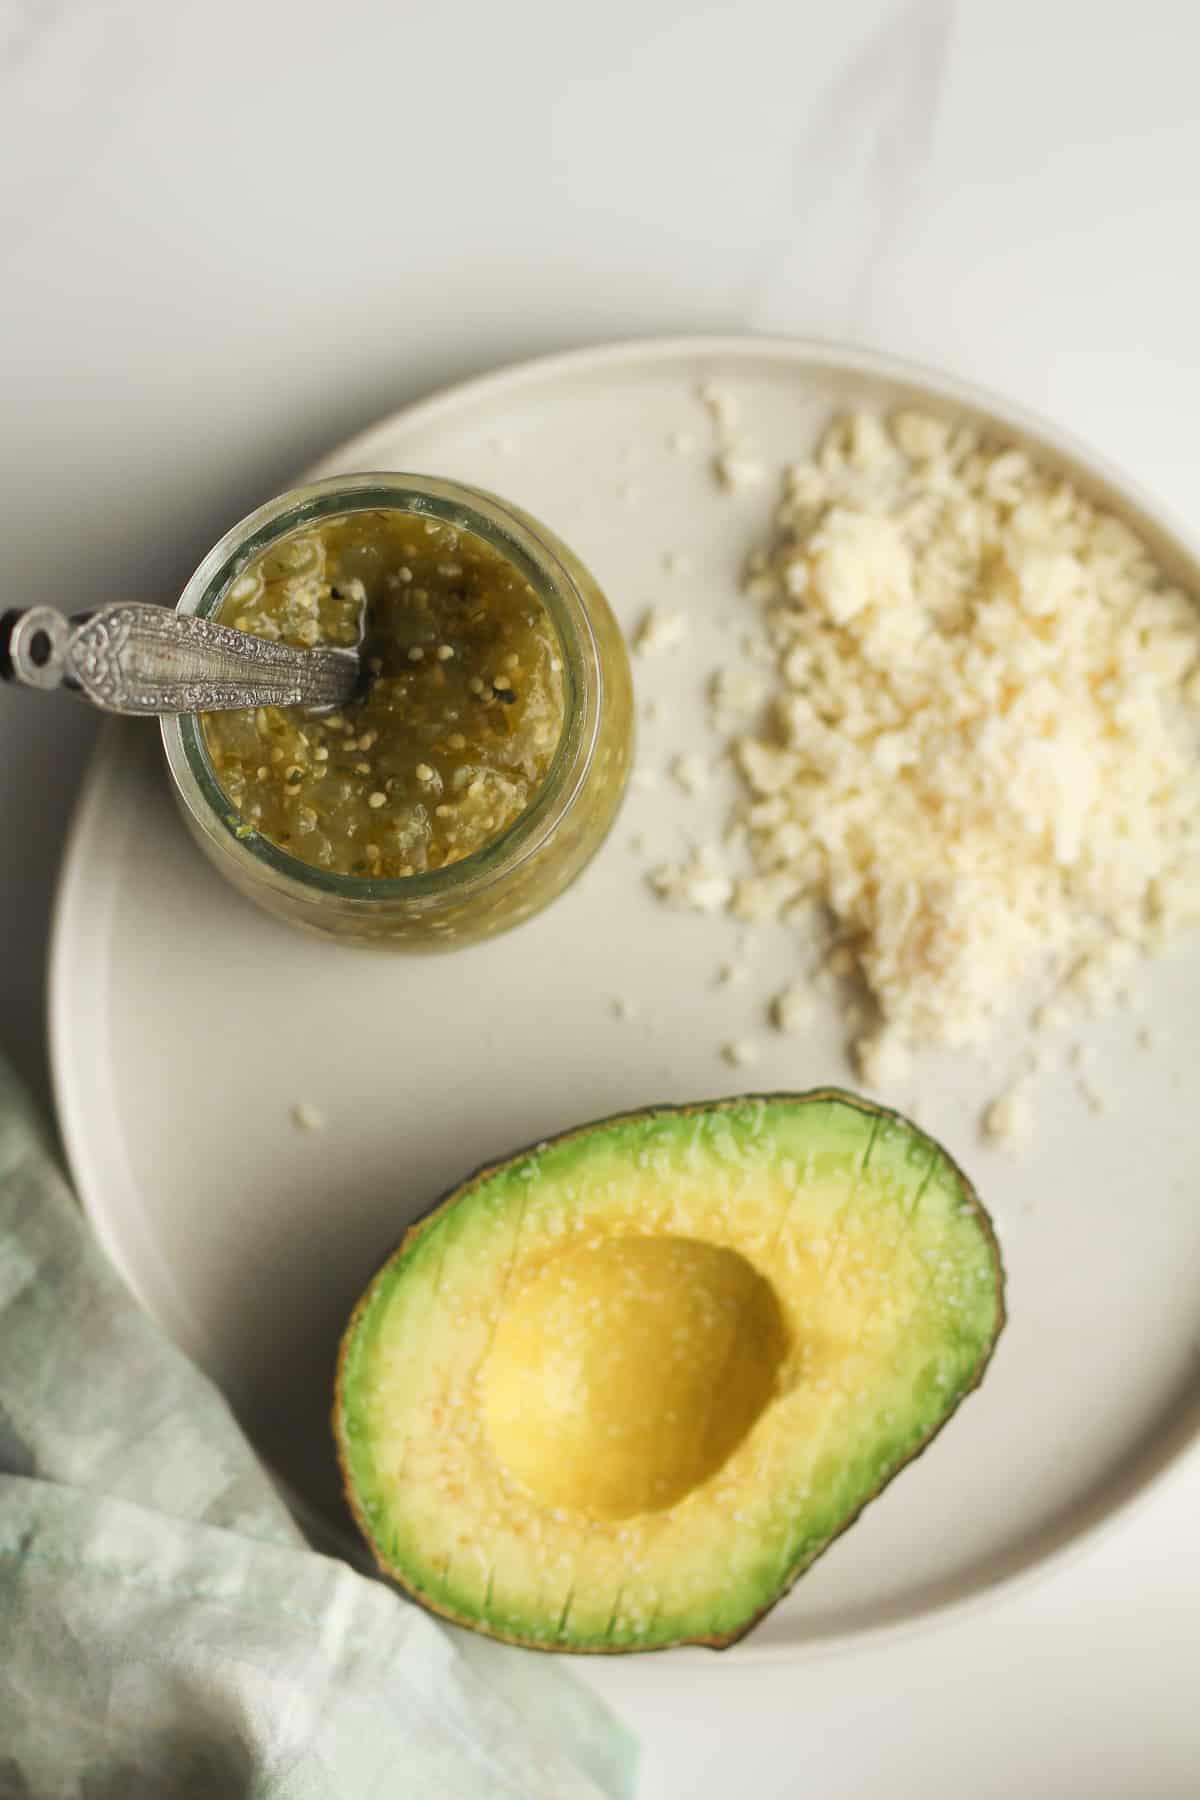 A plate of the salsa verde, Cotija cheese, and a sliced half avocado.